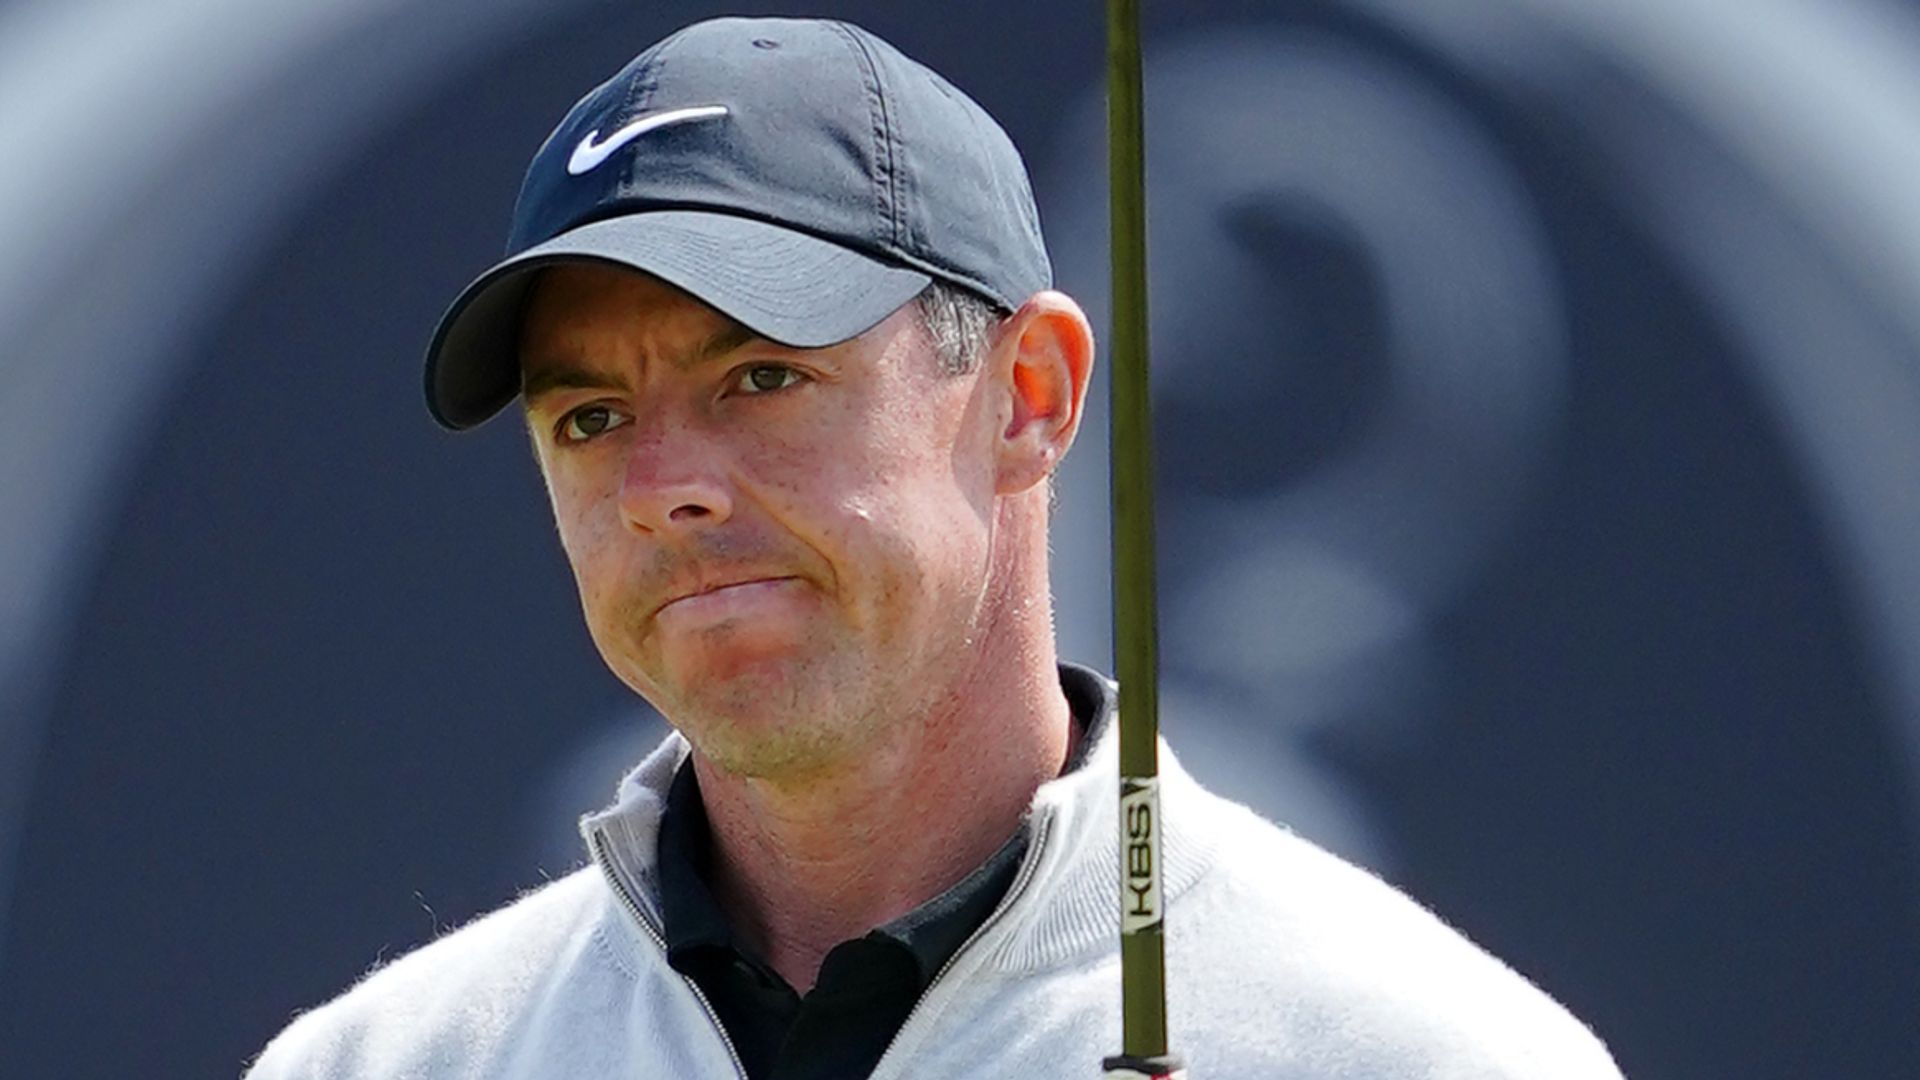 McIlroy: The Open 'not out of my hands' despite nine-shot deficit